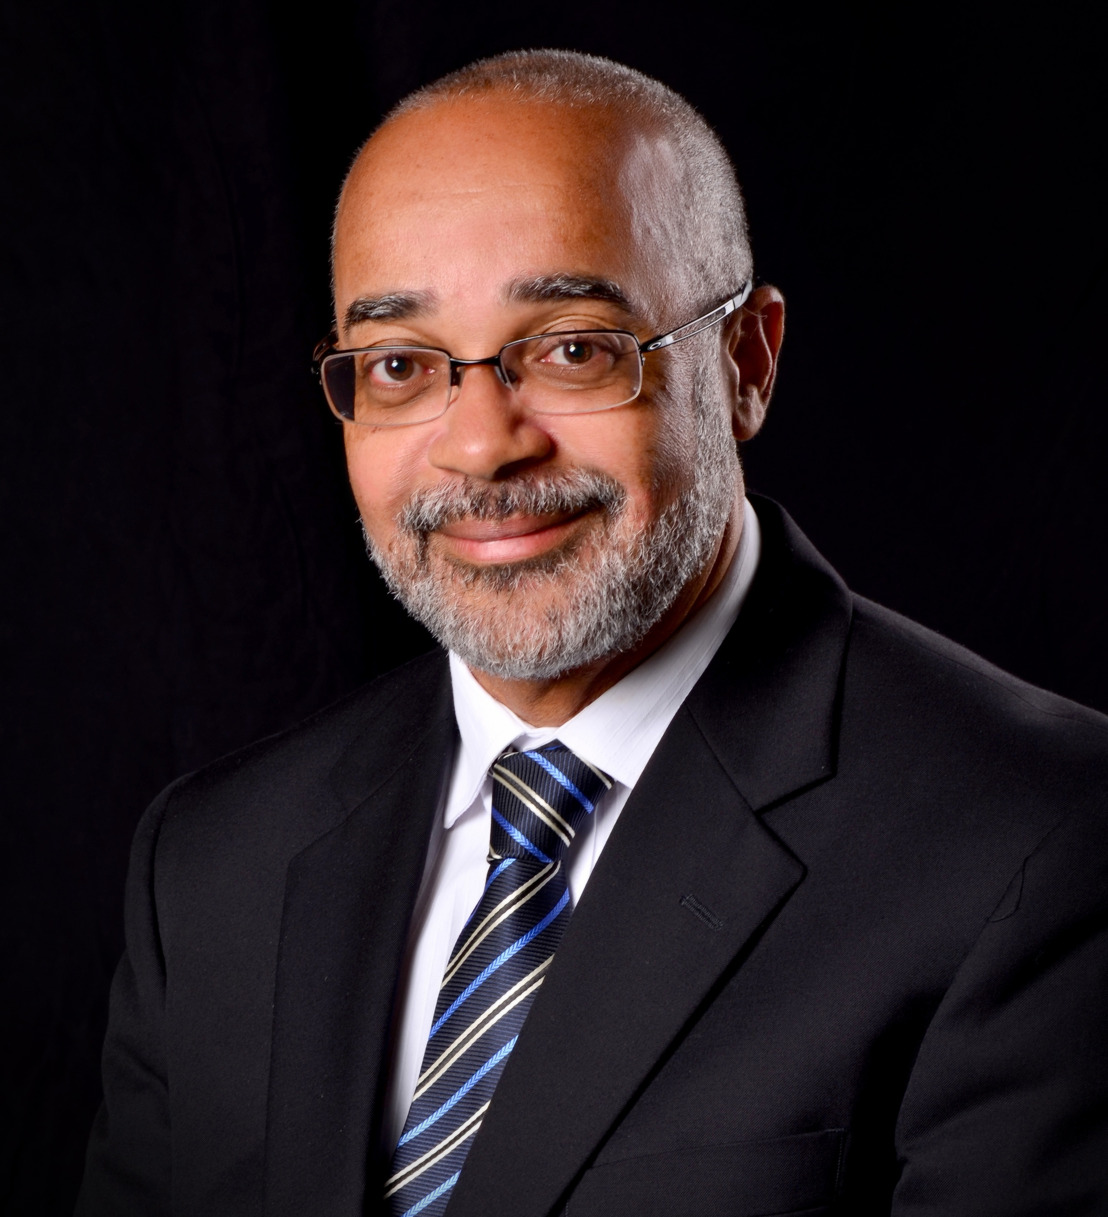 Dr. Didacus Jules reappointed for a 3rd Term as OECS Director General